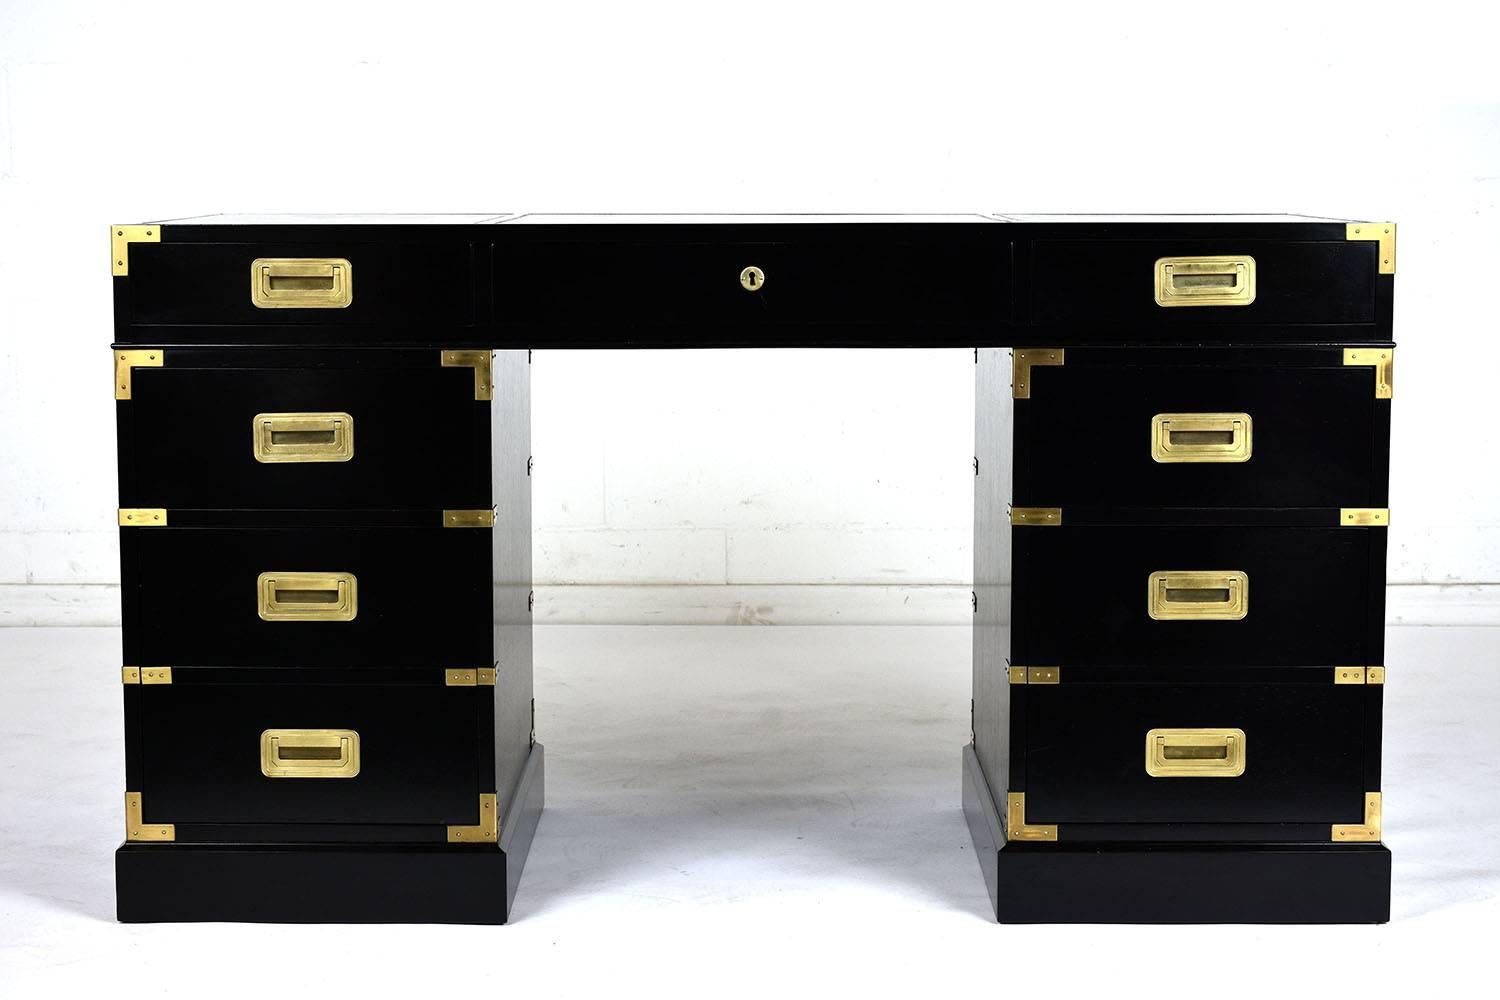 This 1960s Campaign-style mahogany desk has an ebonized and lacquered finish. There are seven drawers with the bottom two being double drawers for extra storage. The corners of the drawers and desk have brass accents and the drawers have brass